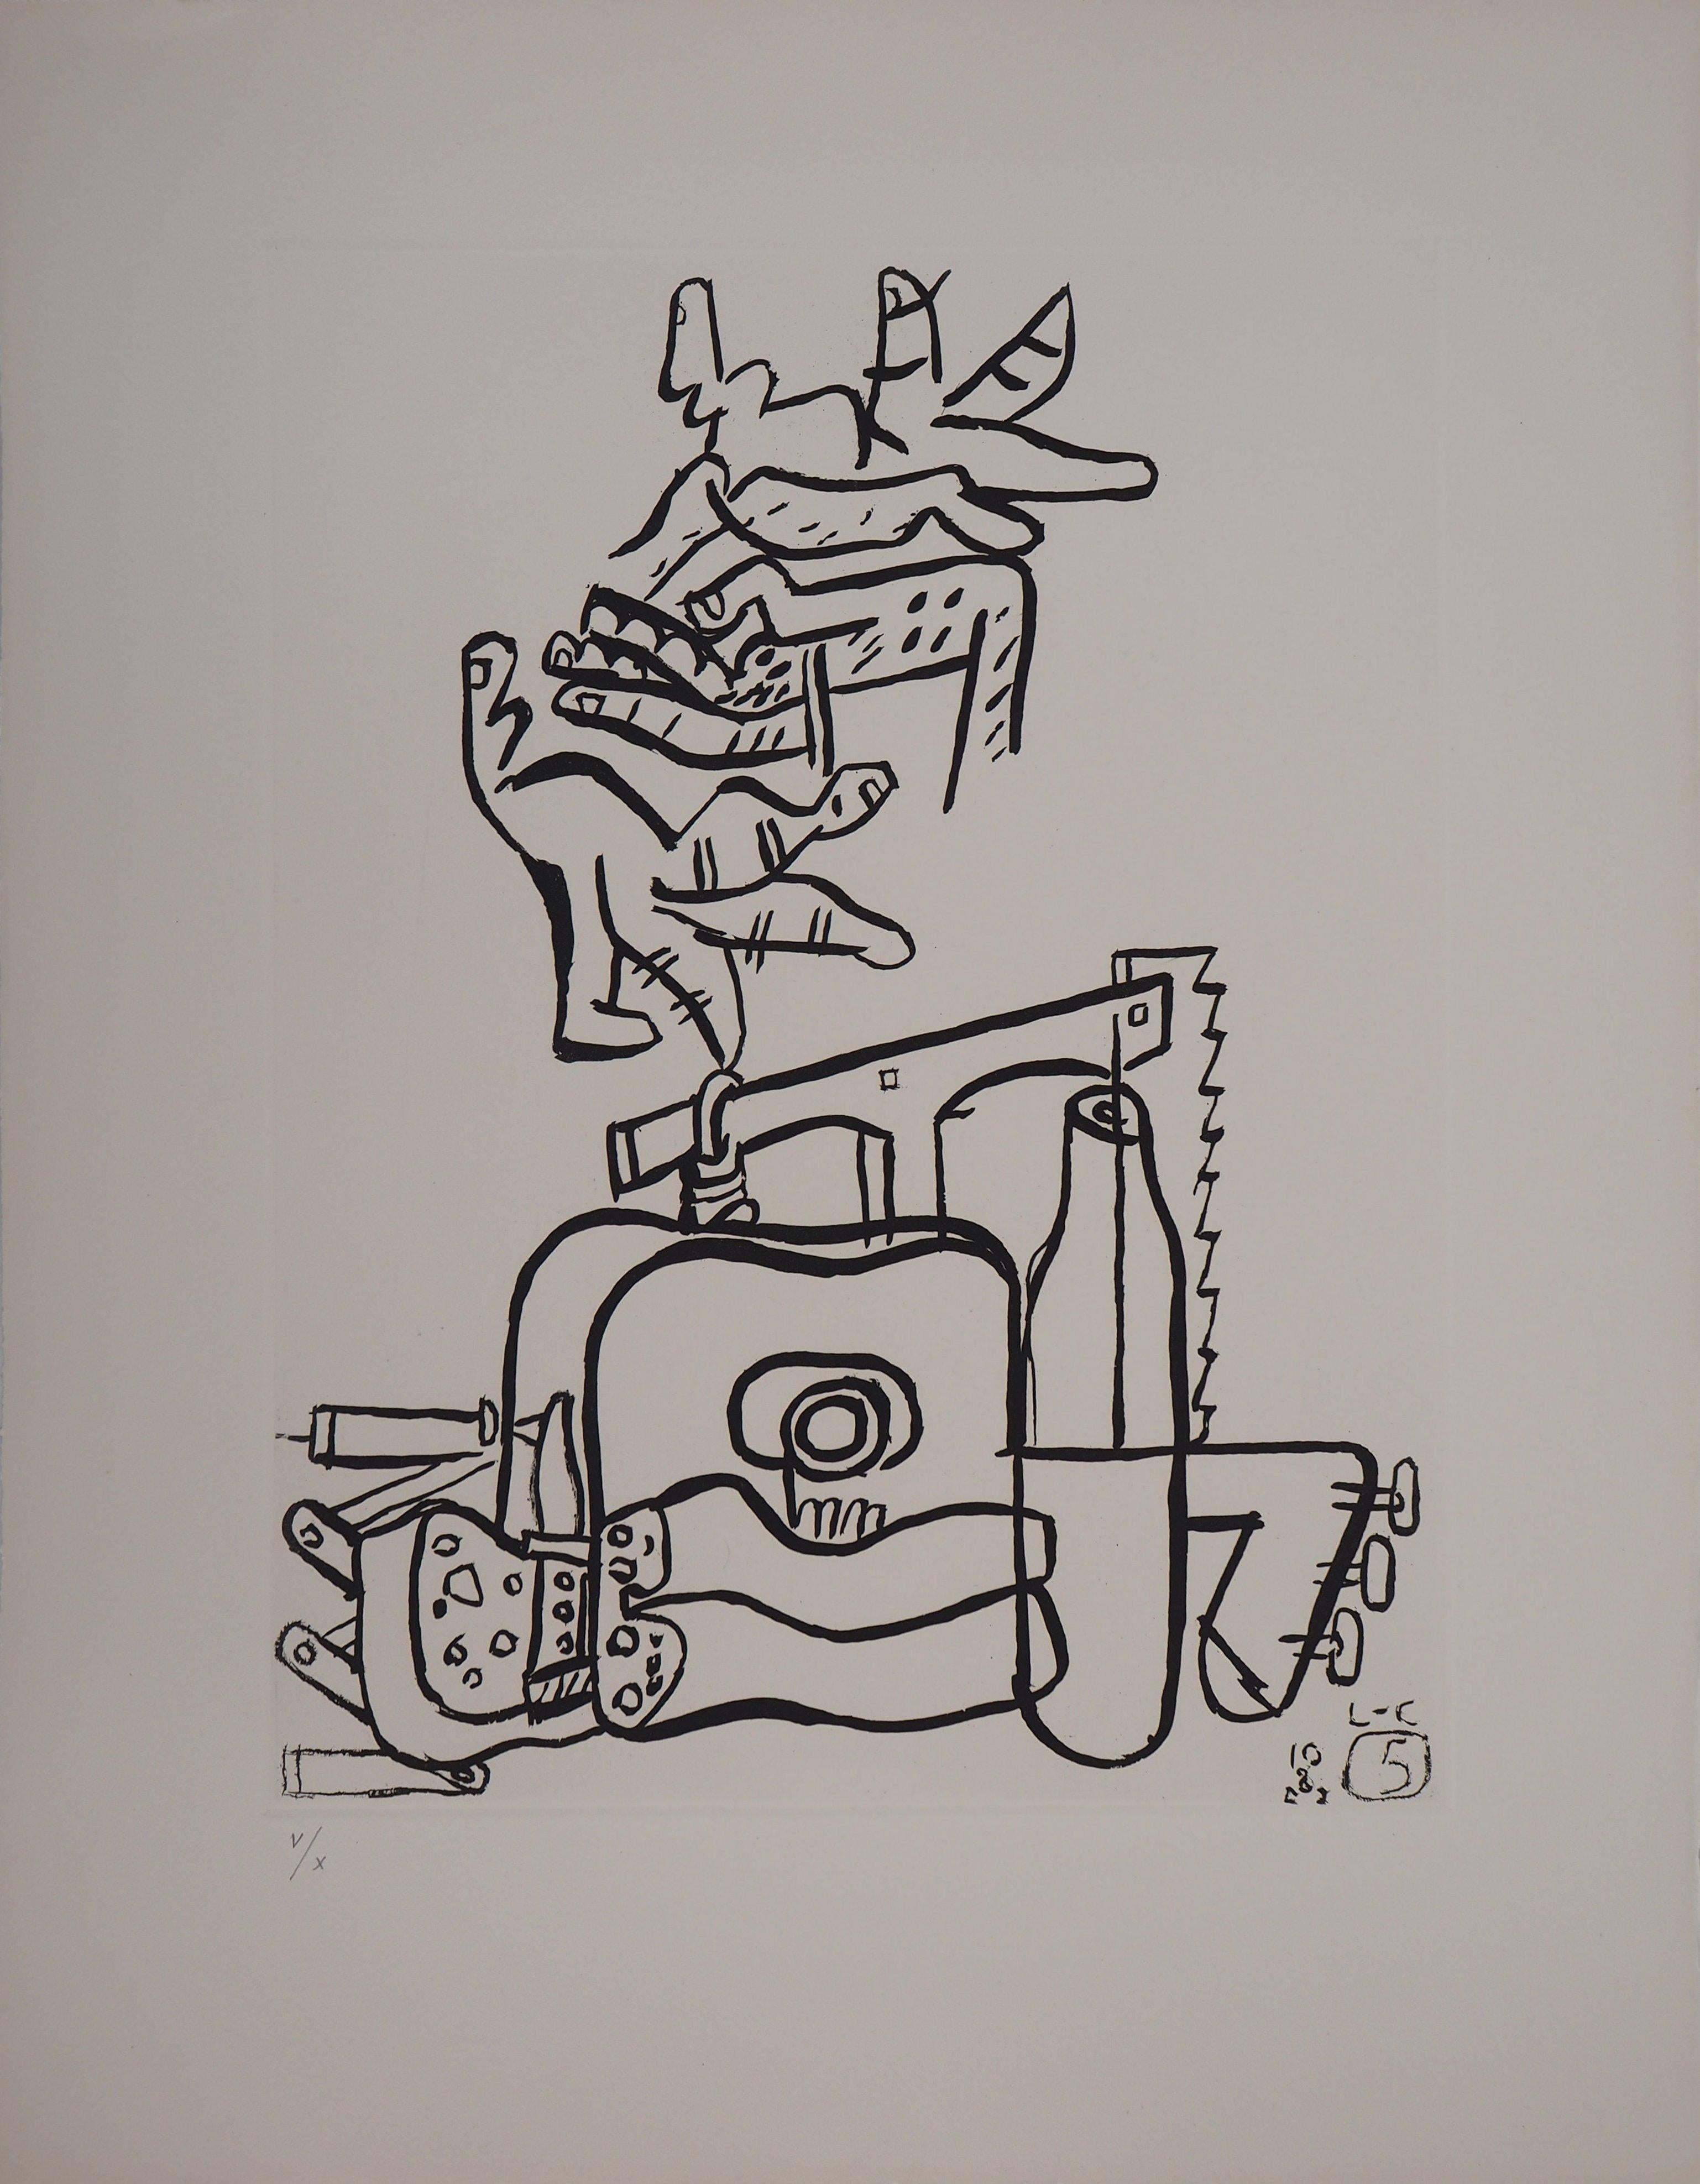 Unite : Architect Tools and Hands - Original etching - Numbered / 10 - Modern Print by Le Corbusier